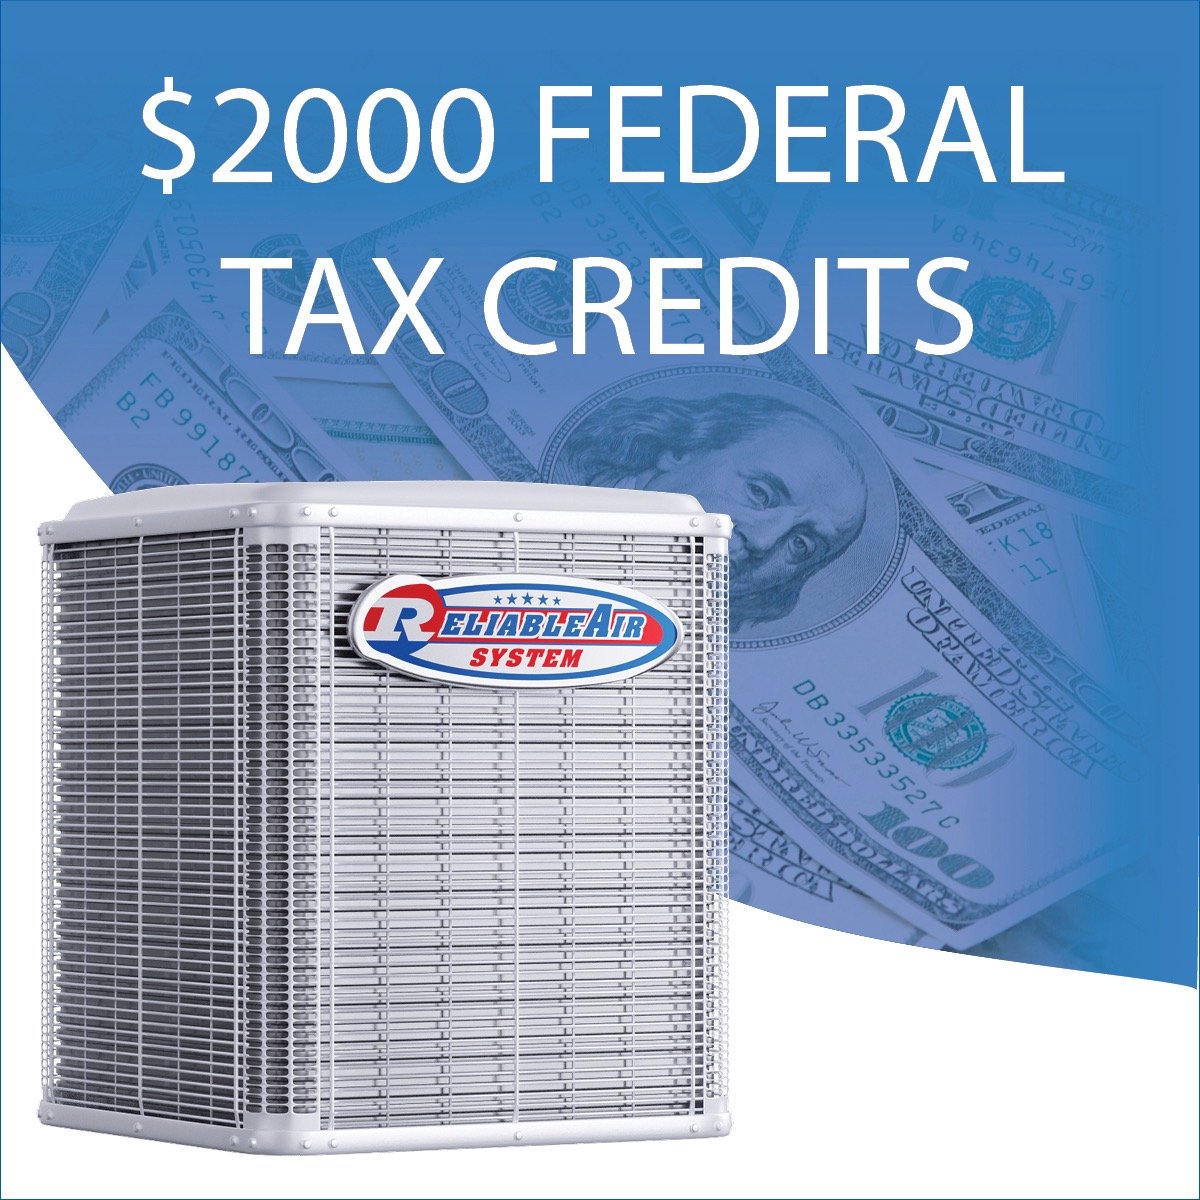 30% tax credit on some appliances 